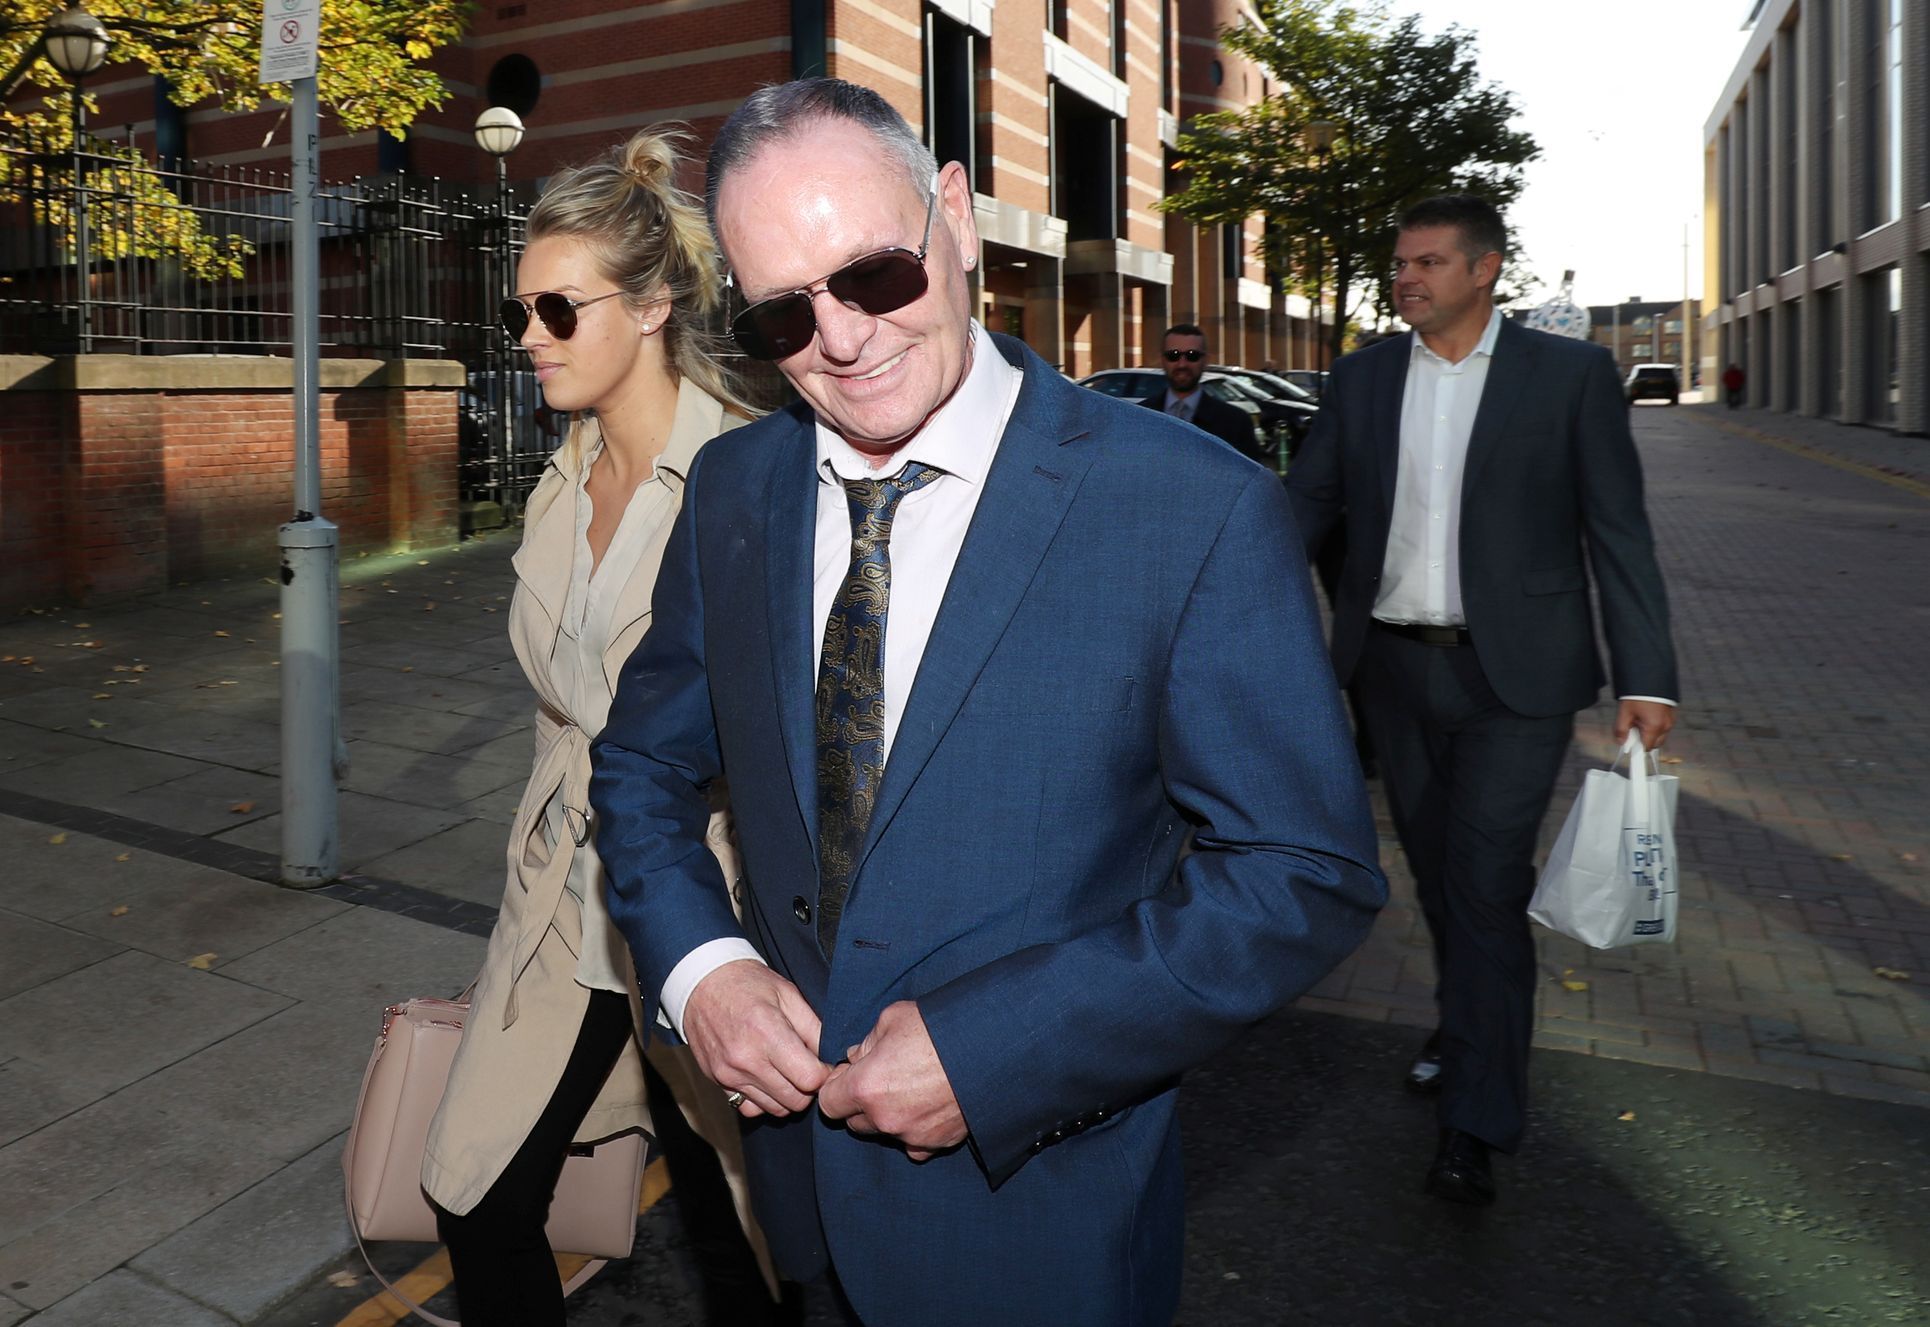 Former England footballer Paul Gascoigne leaves at Teesside Crown Court in Middlesbrough